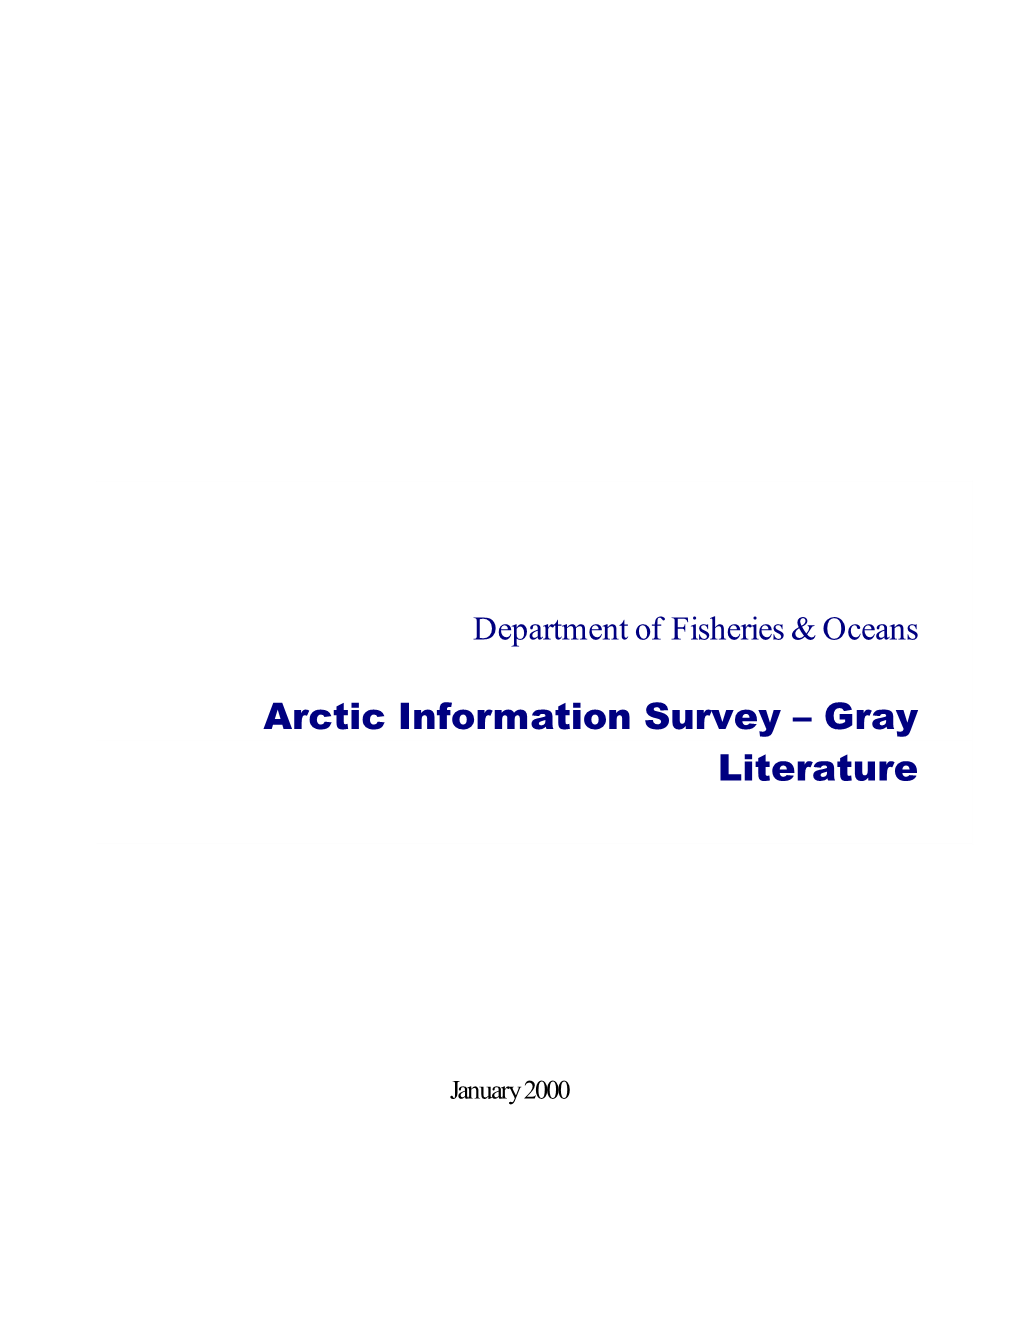 DFO Grey Literature Review Report